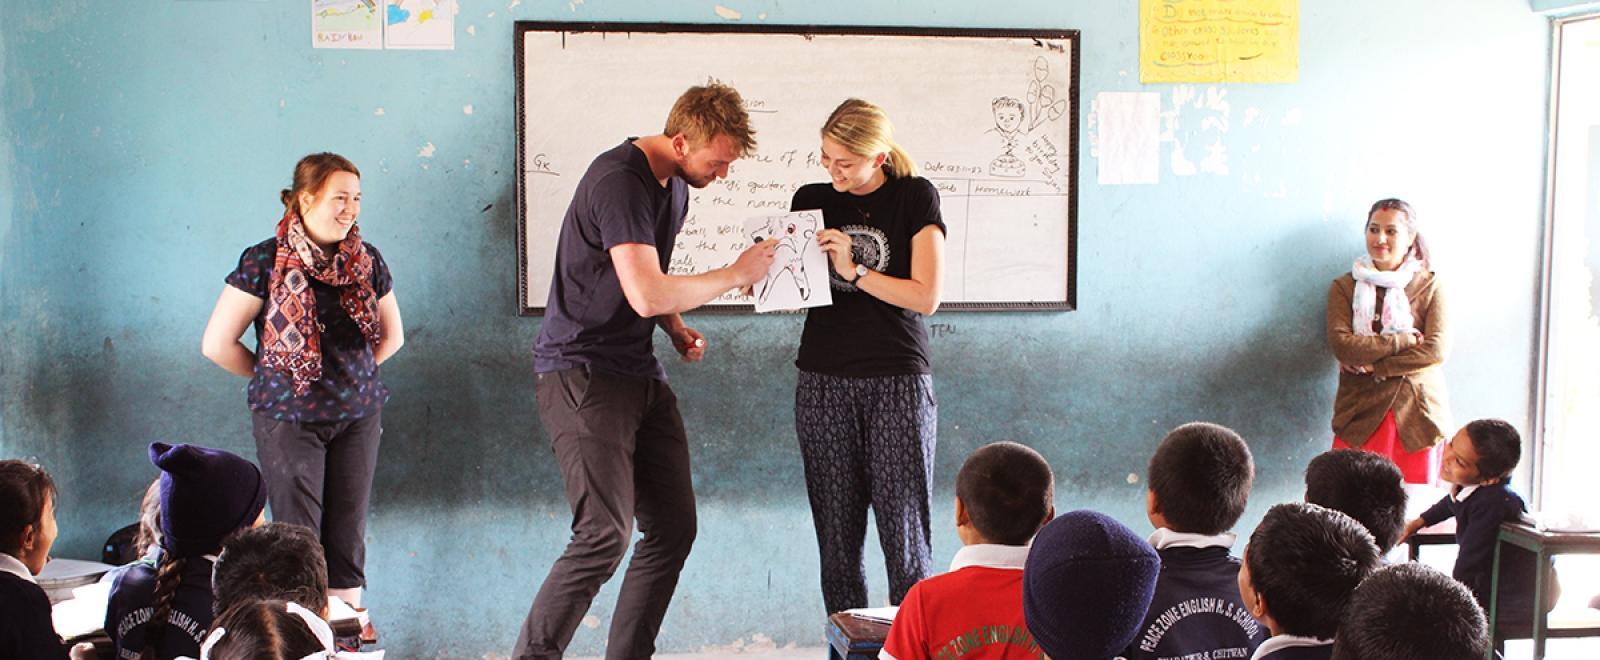 Projects Abroad volunteers run a dental hygiene class at our volunteer teaching placements in Nepal.